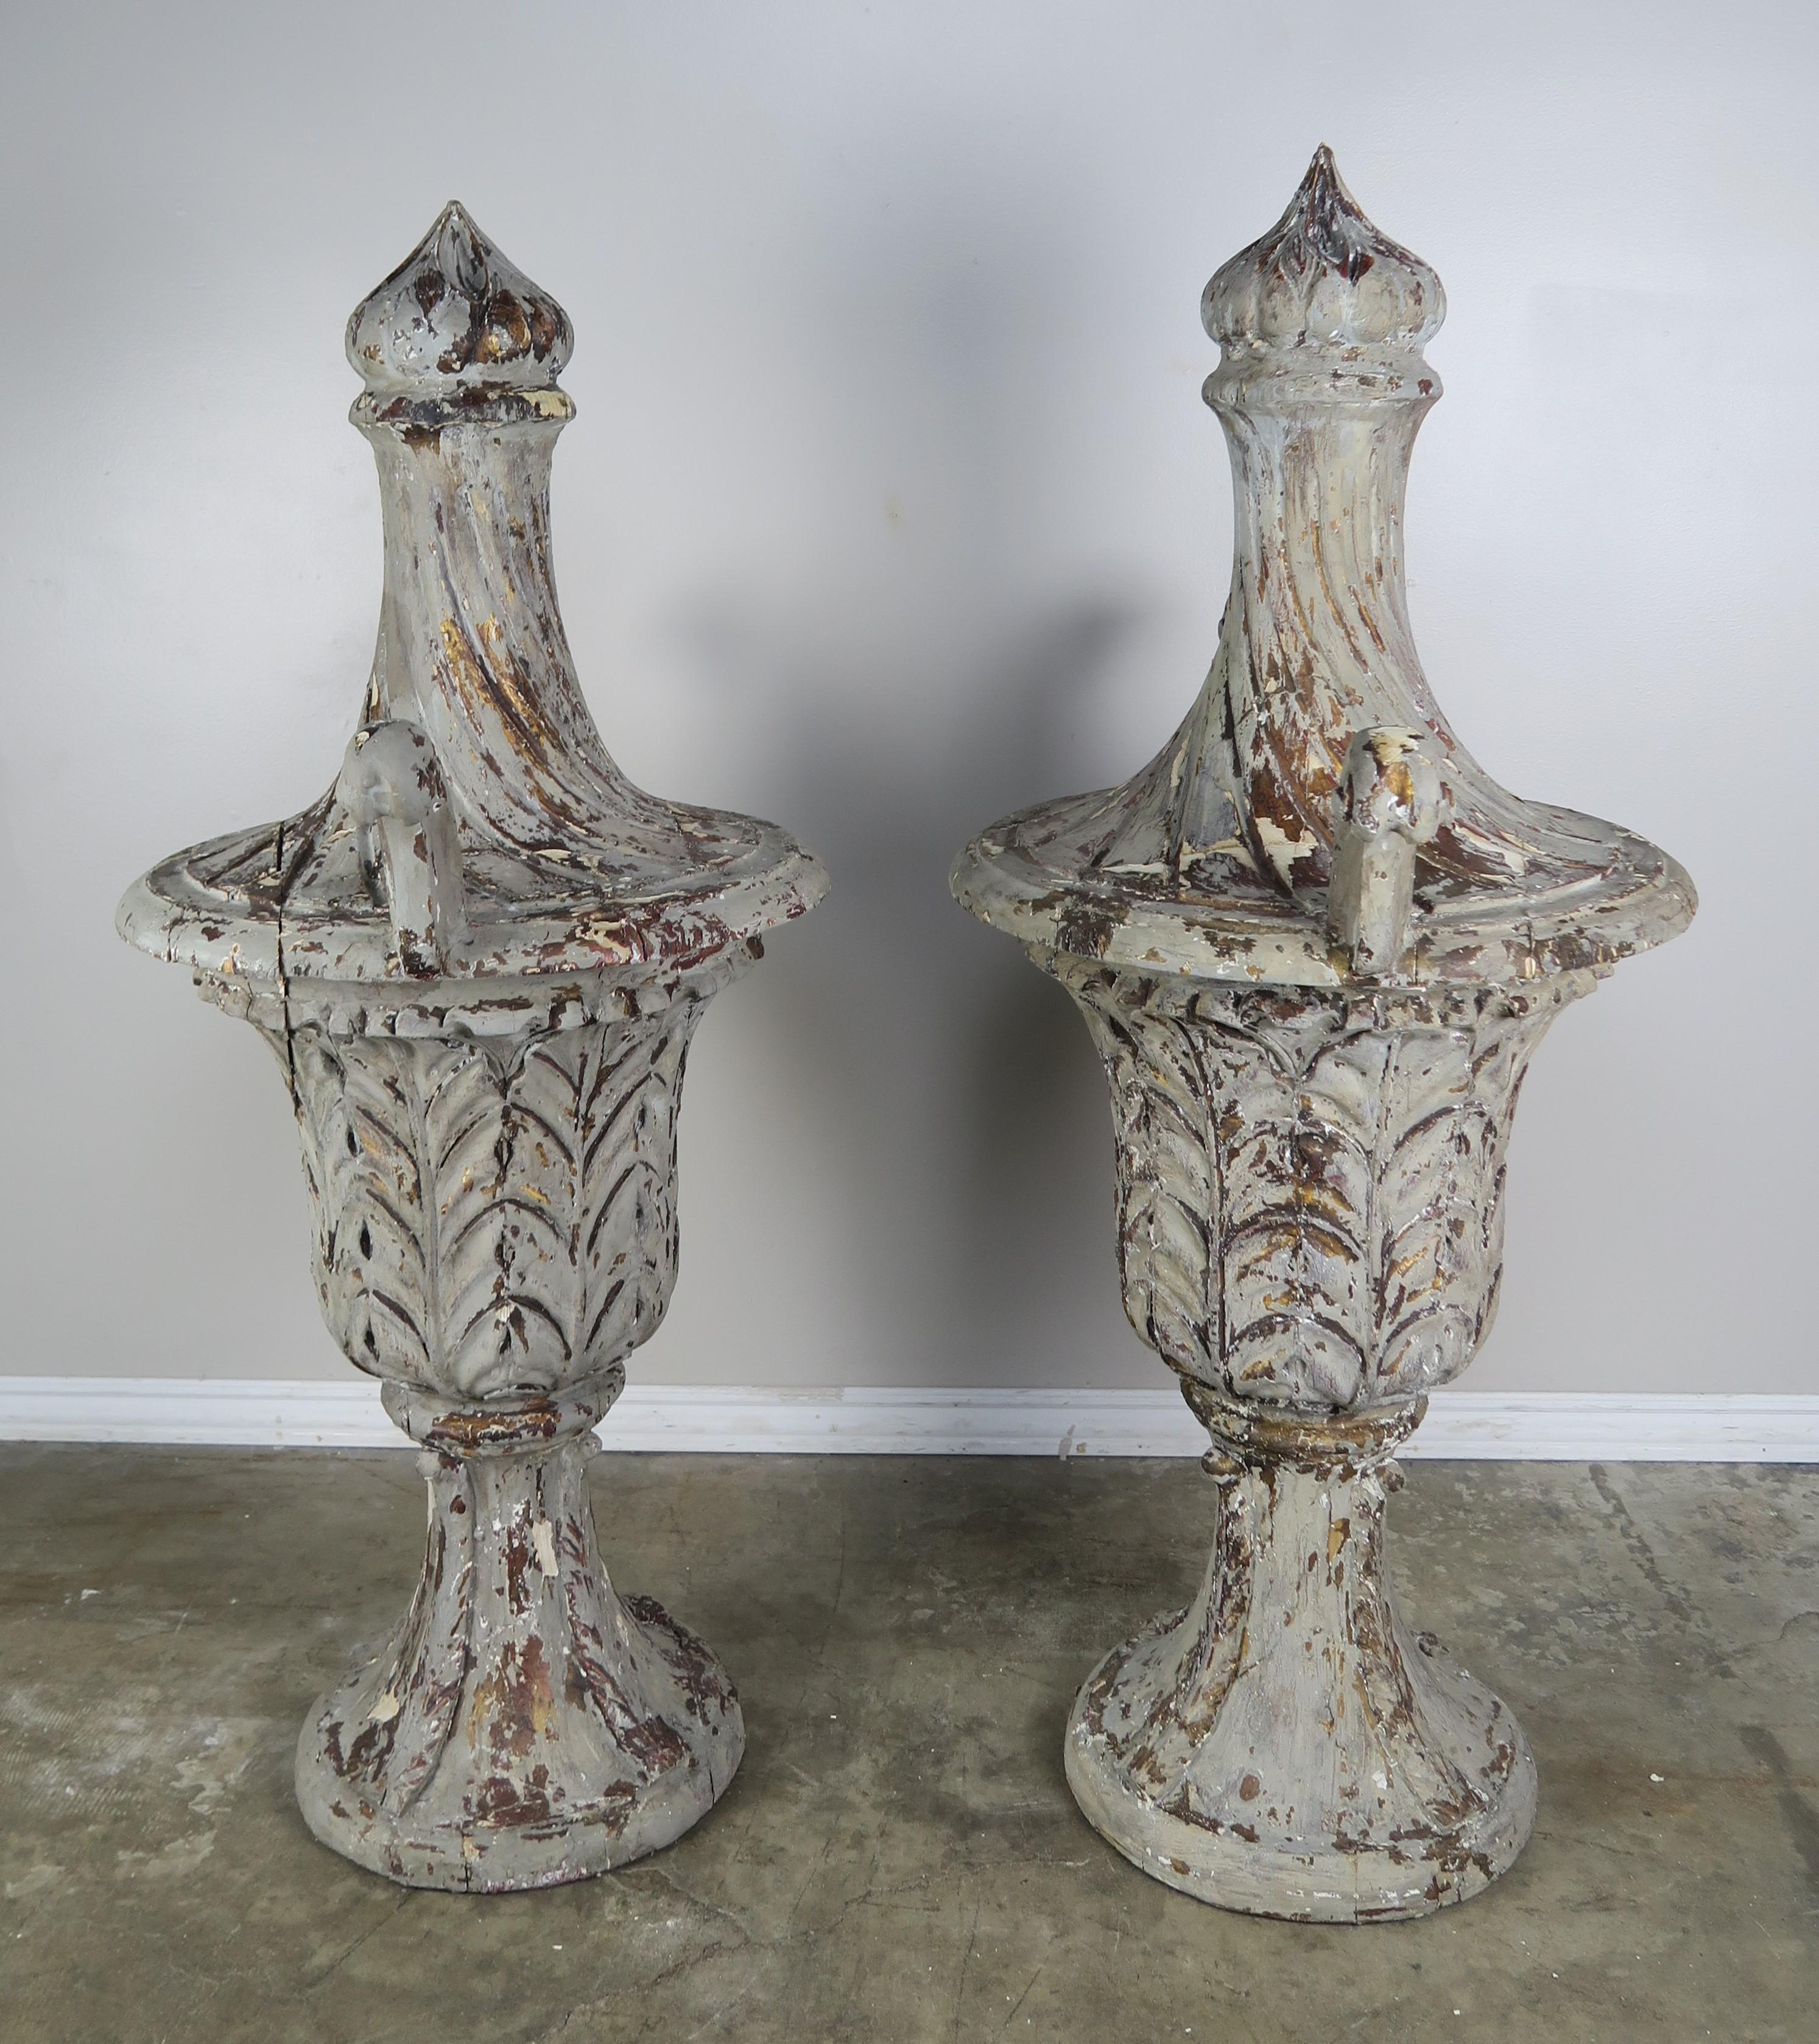 Pair of grand size carved wood flamed finial urns with two arms. The urns have a beautiful worn grey painted finish with natural wood exposed underneath the distressed paint.